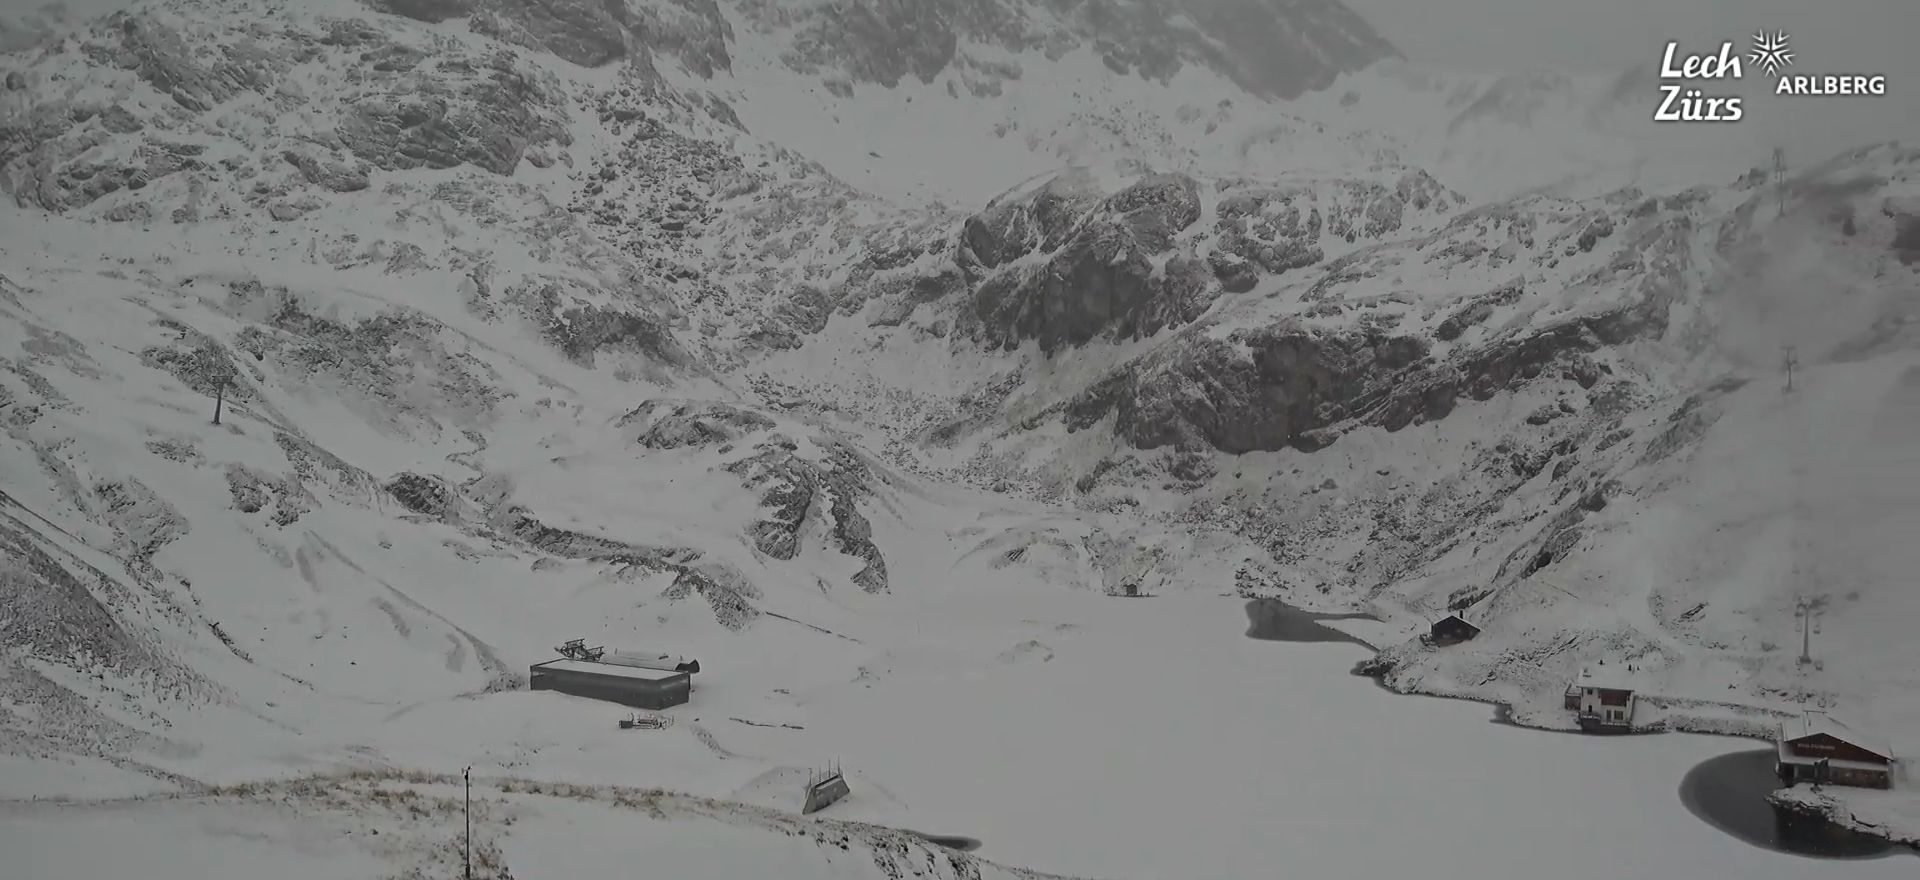 It is not much, but it also turns white in the Arlberg